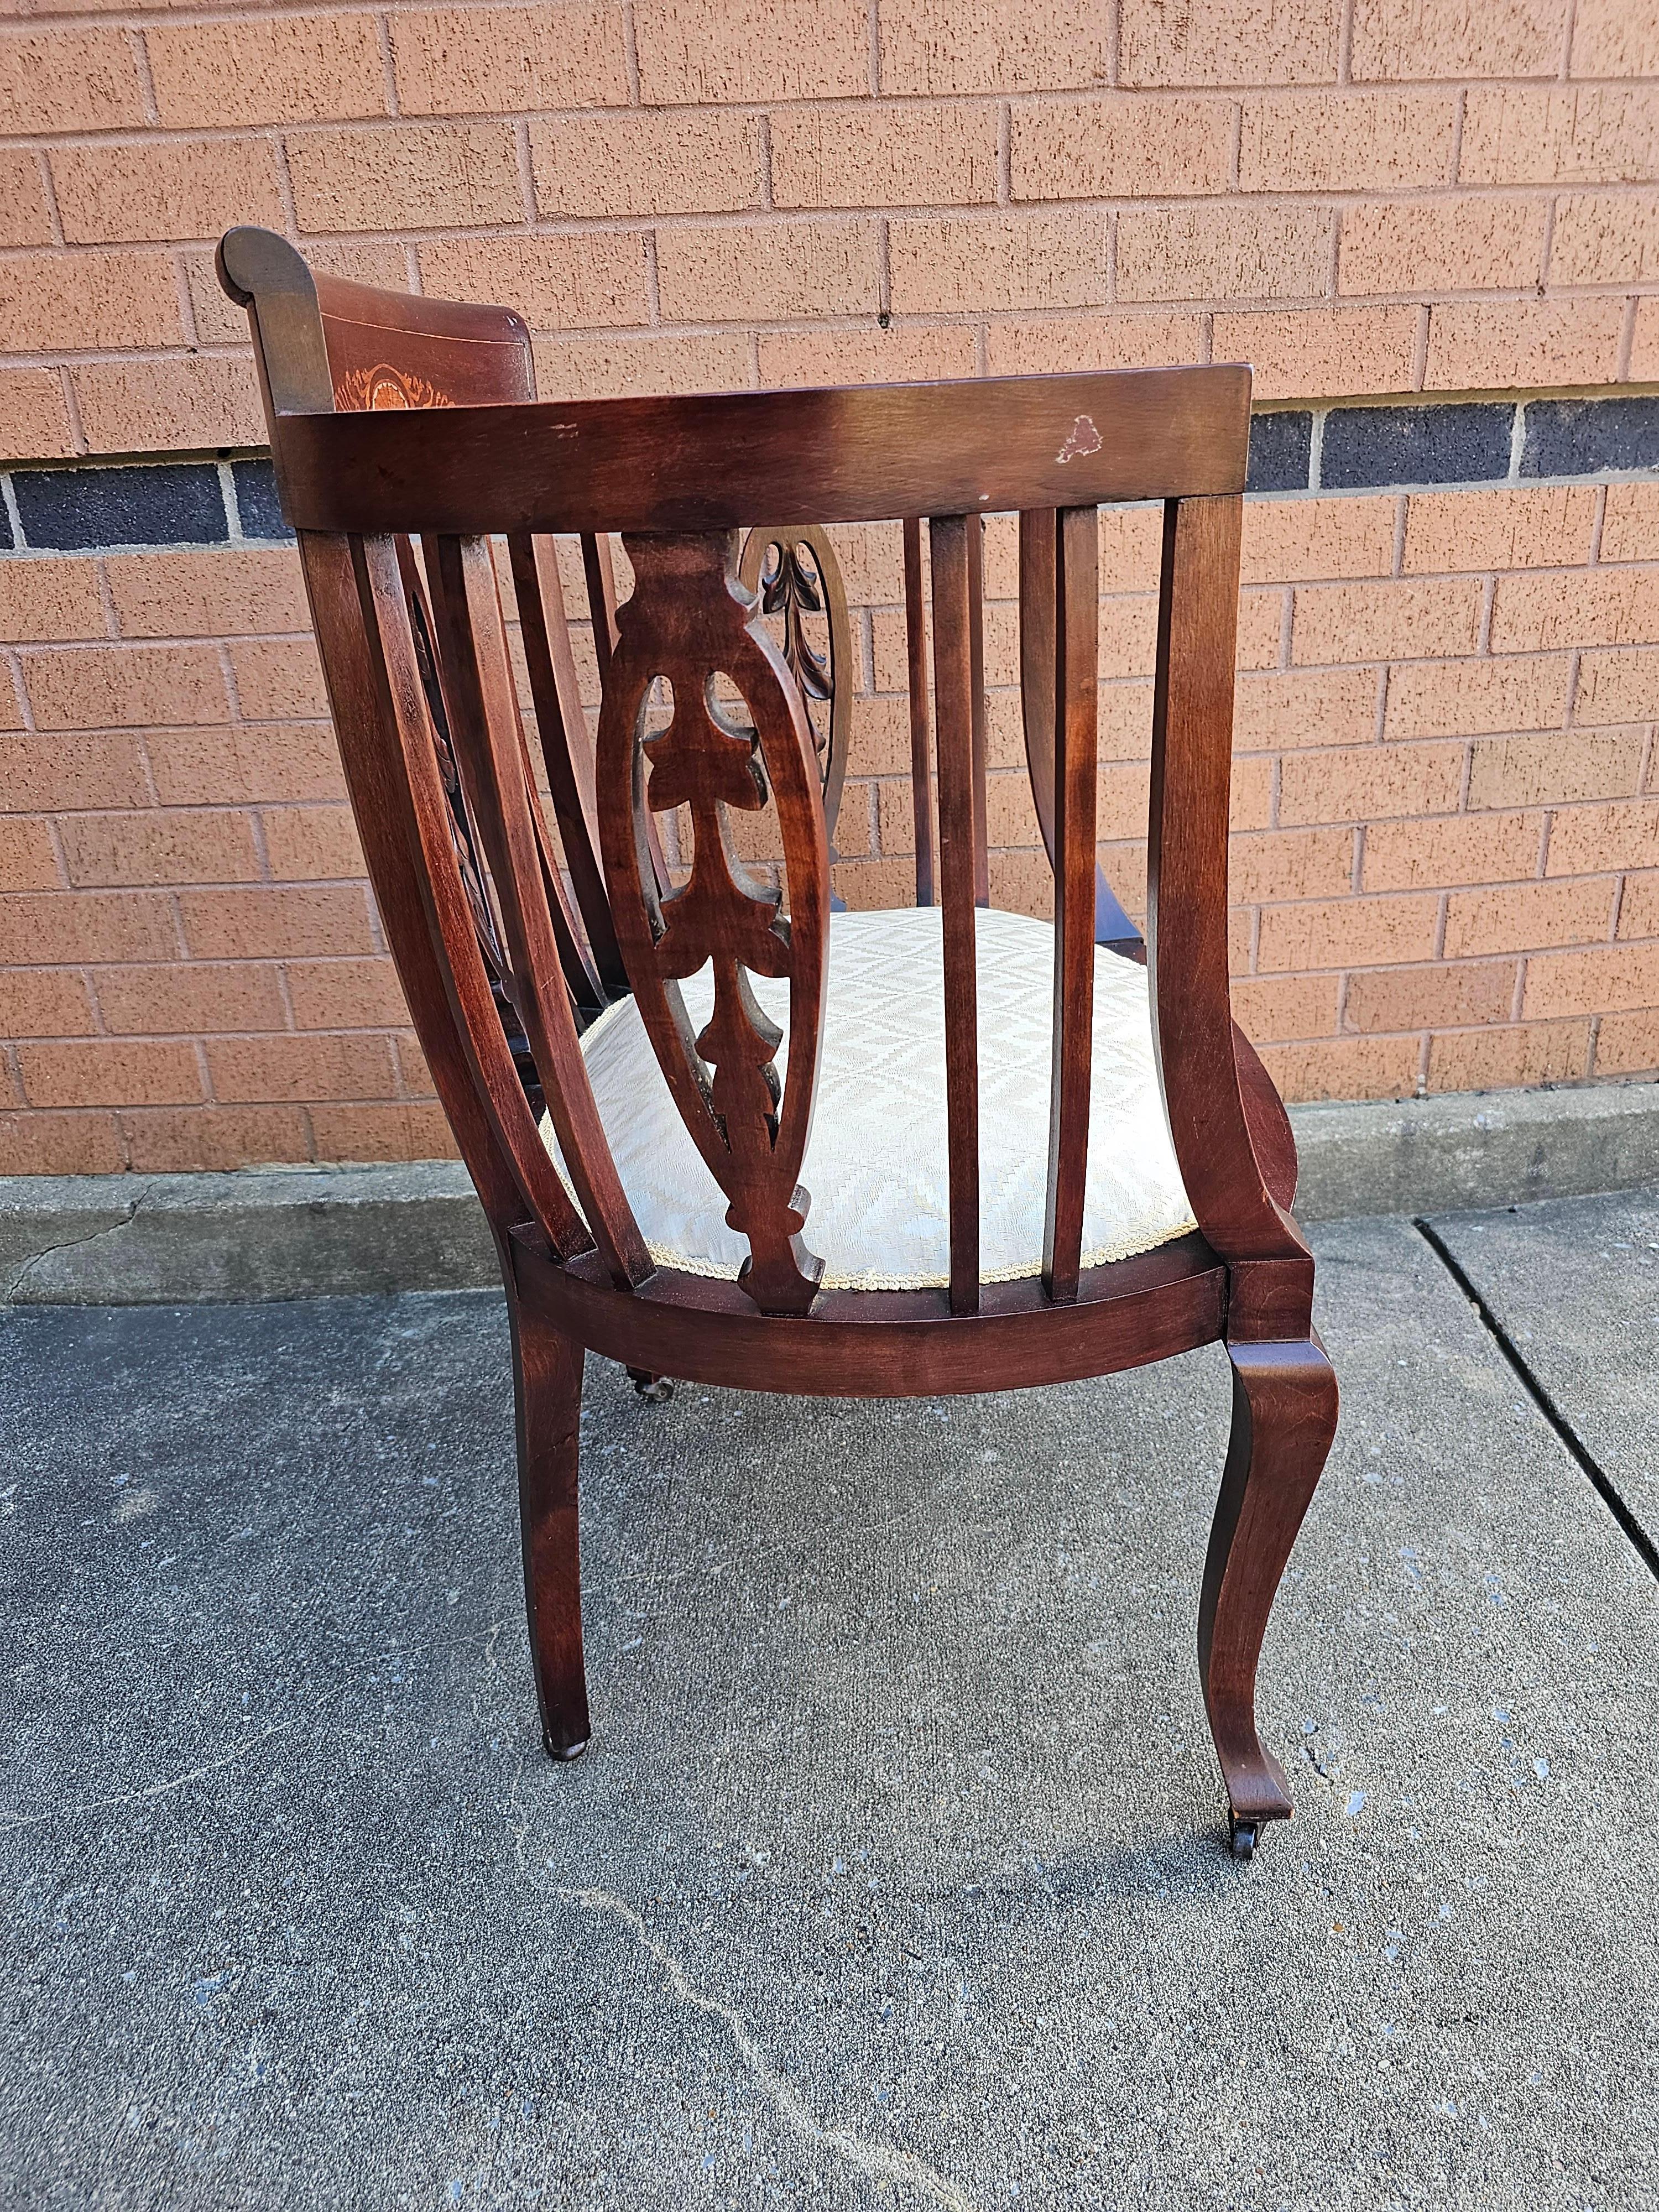 Early 20th Century Edwardian Inlaid Mahogany and Upholstered Seat Barrel Chair For Sale 2